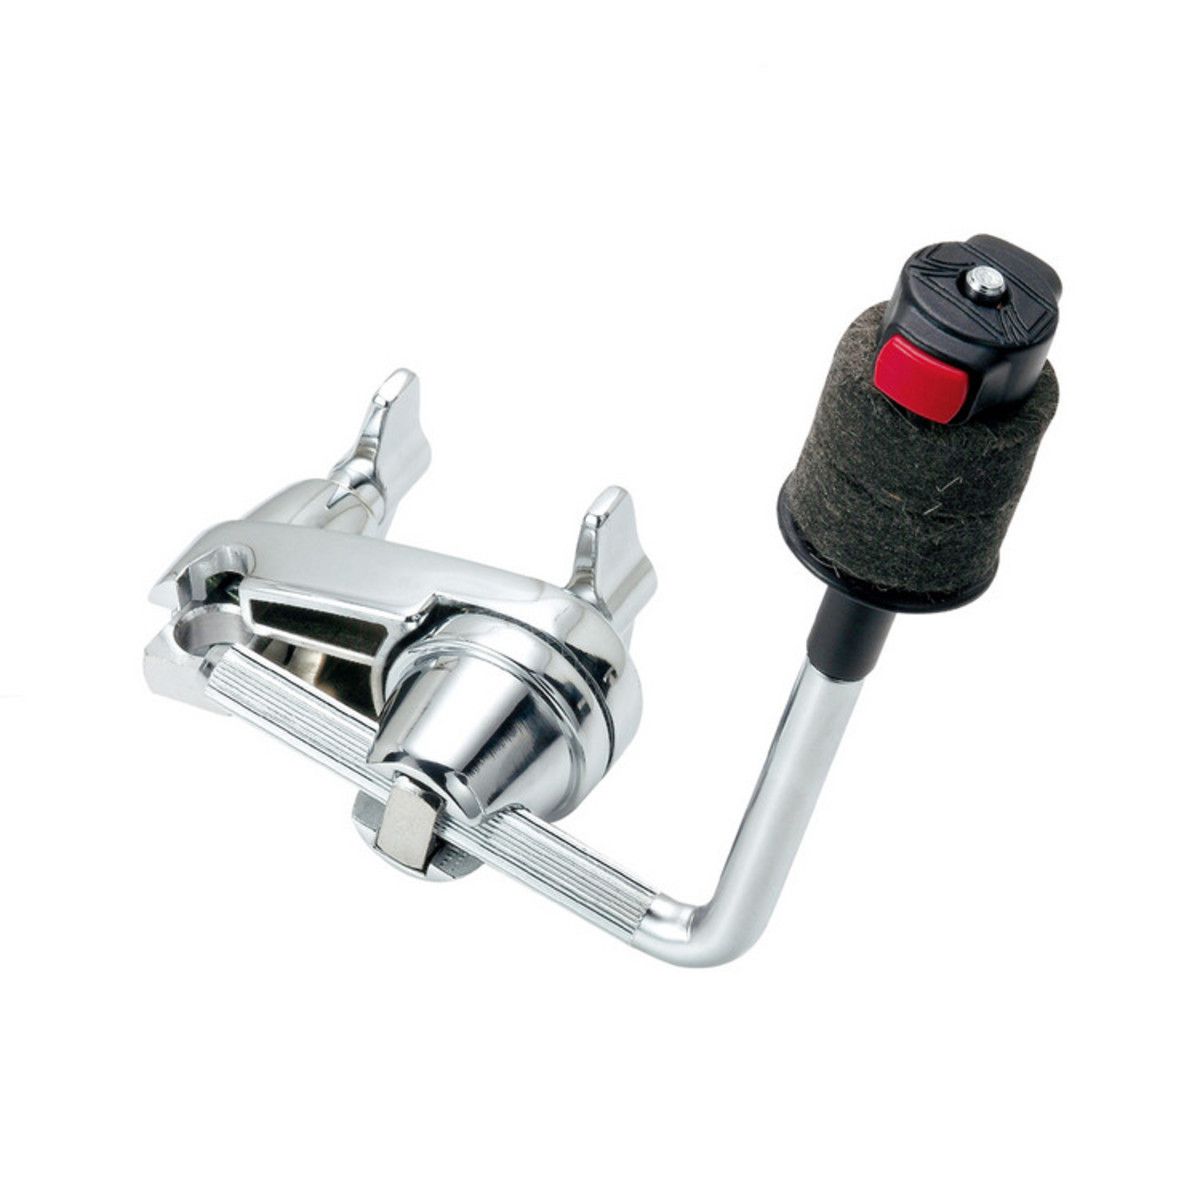 An image of Tama CYA5E Cymbal Attachment | PMT Online